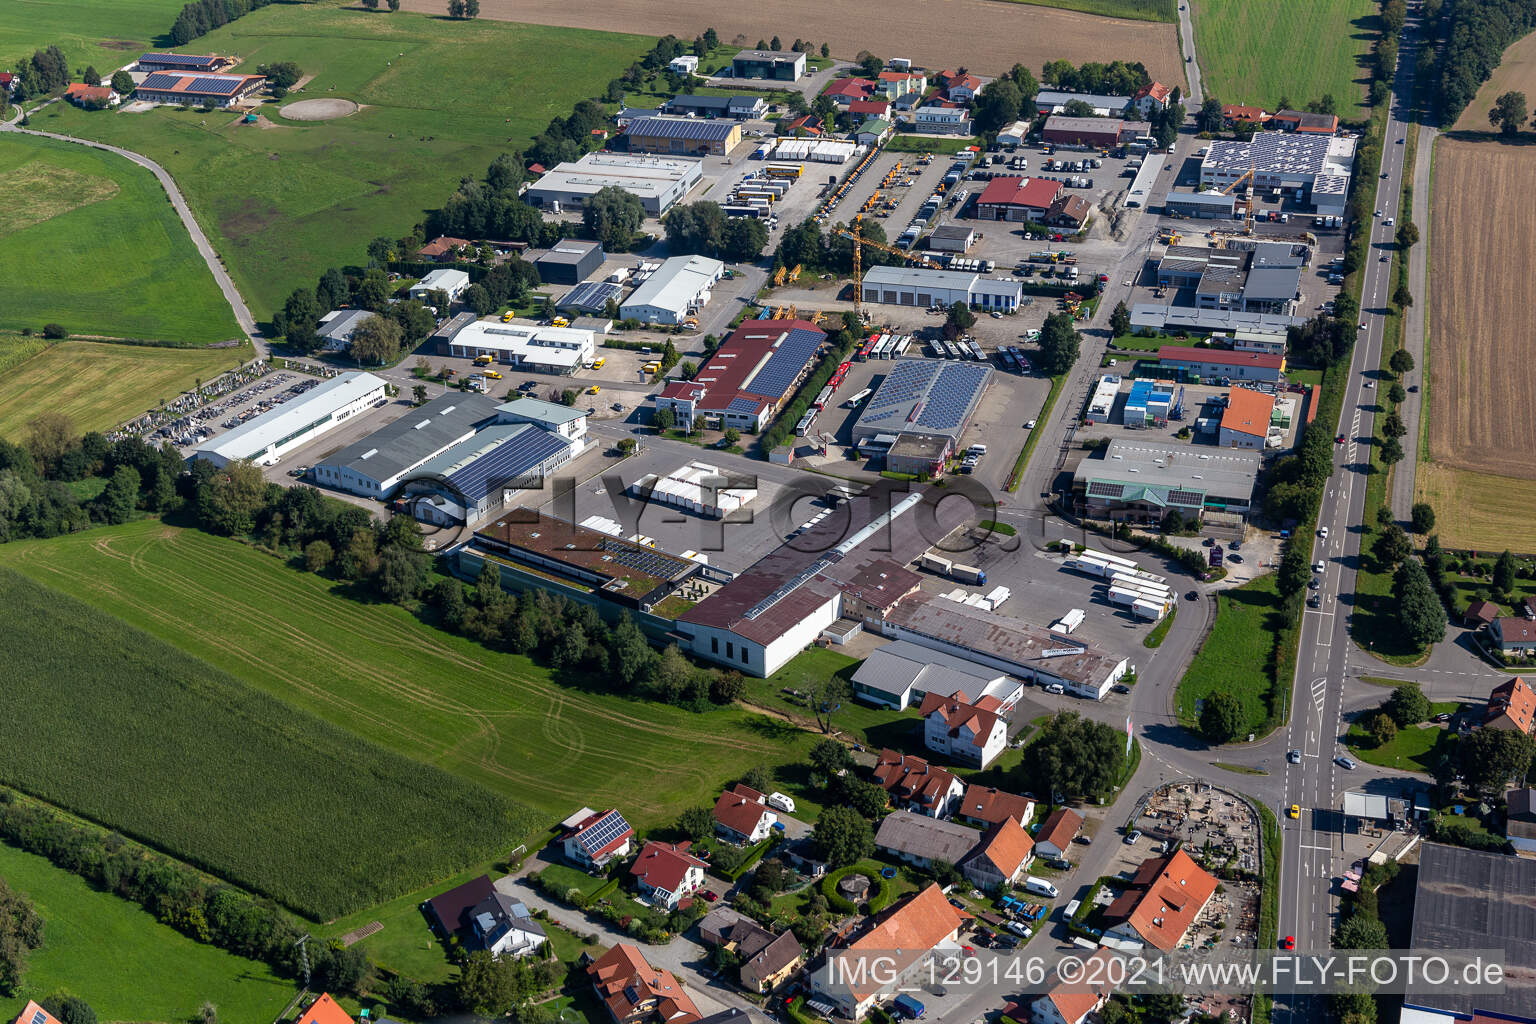 Riedweg industrial area in the district Gaisbeuren in Bad Waldsee in the state Baden-Wuerttemberg, Germany